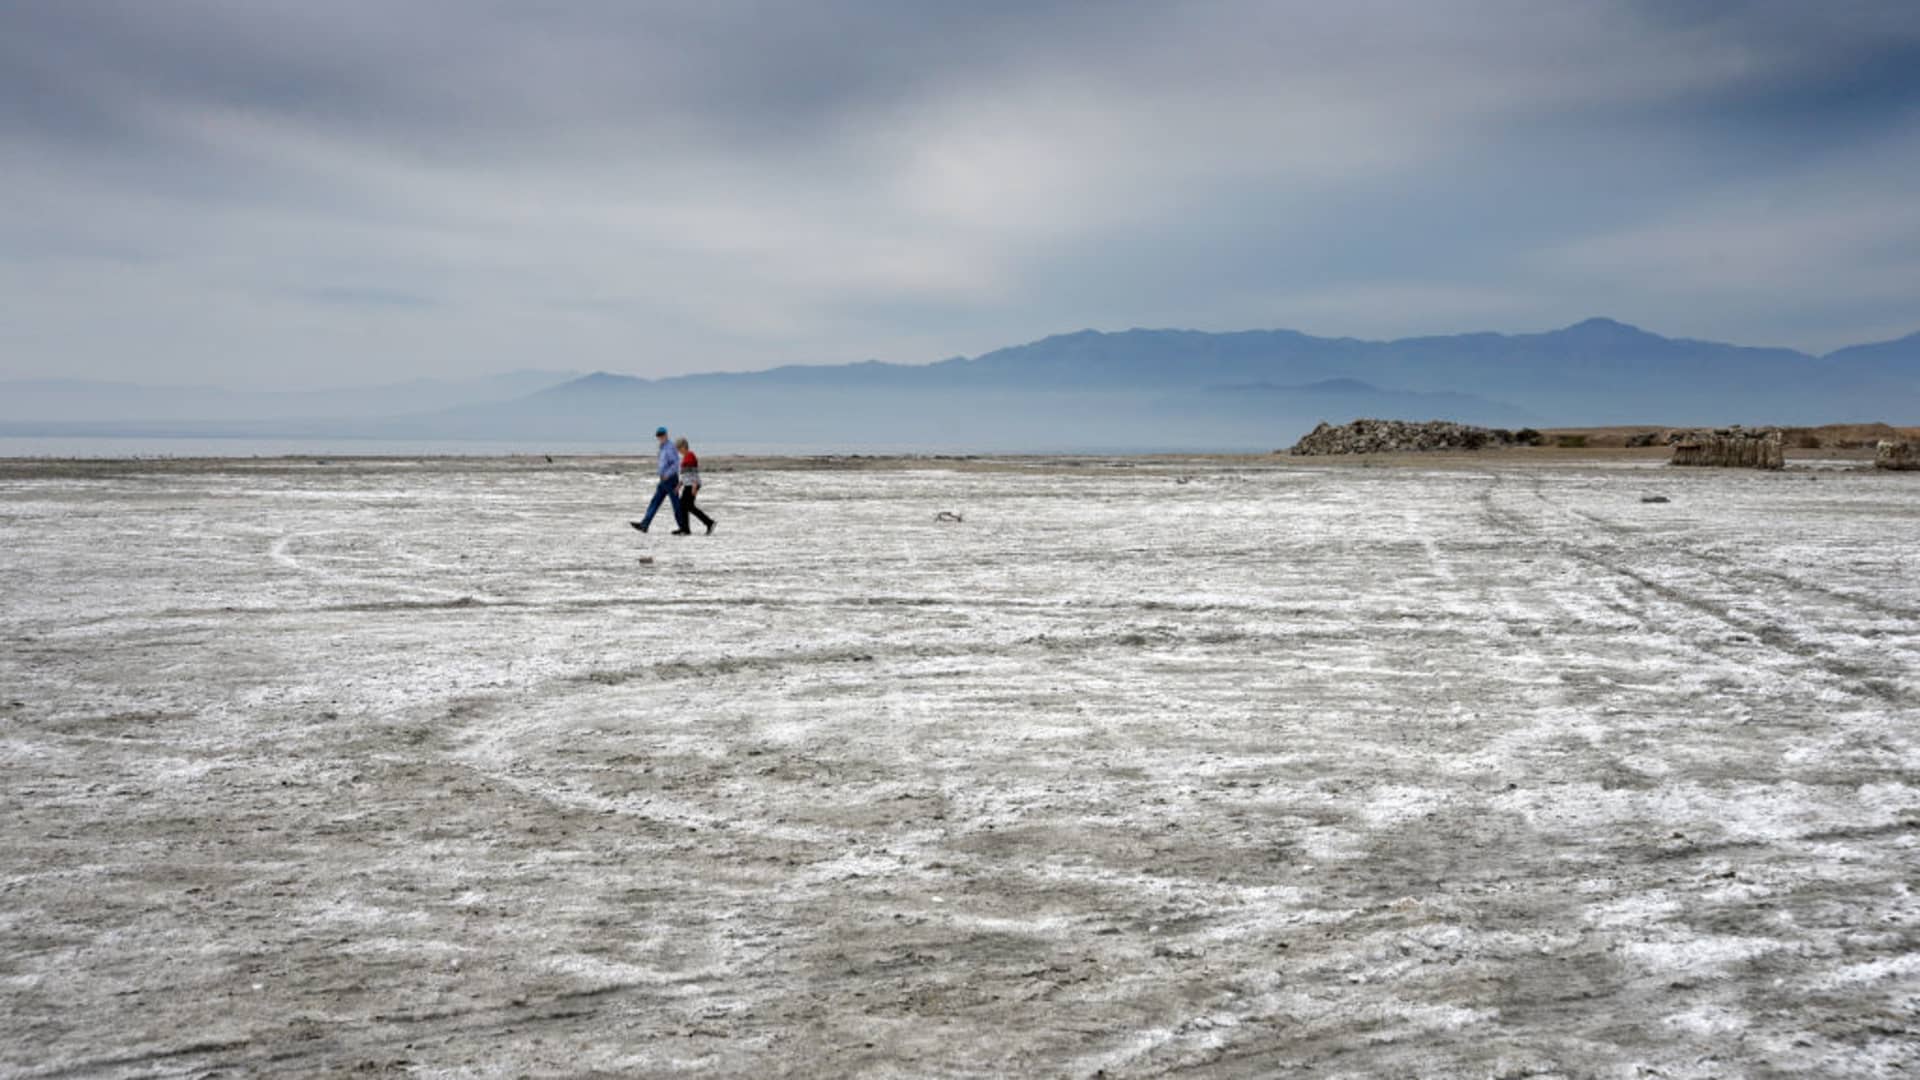 A couple walks toward the shore of the Salton Sea in Southern California. The shallow saline lake was formed accidentlaly in 1905 following the rupture of canal diverting water from the Colorado River to the agricultural area of California's Imperial Valley.